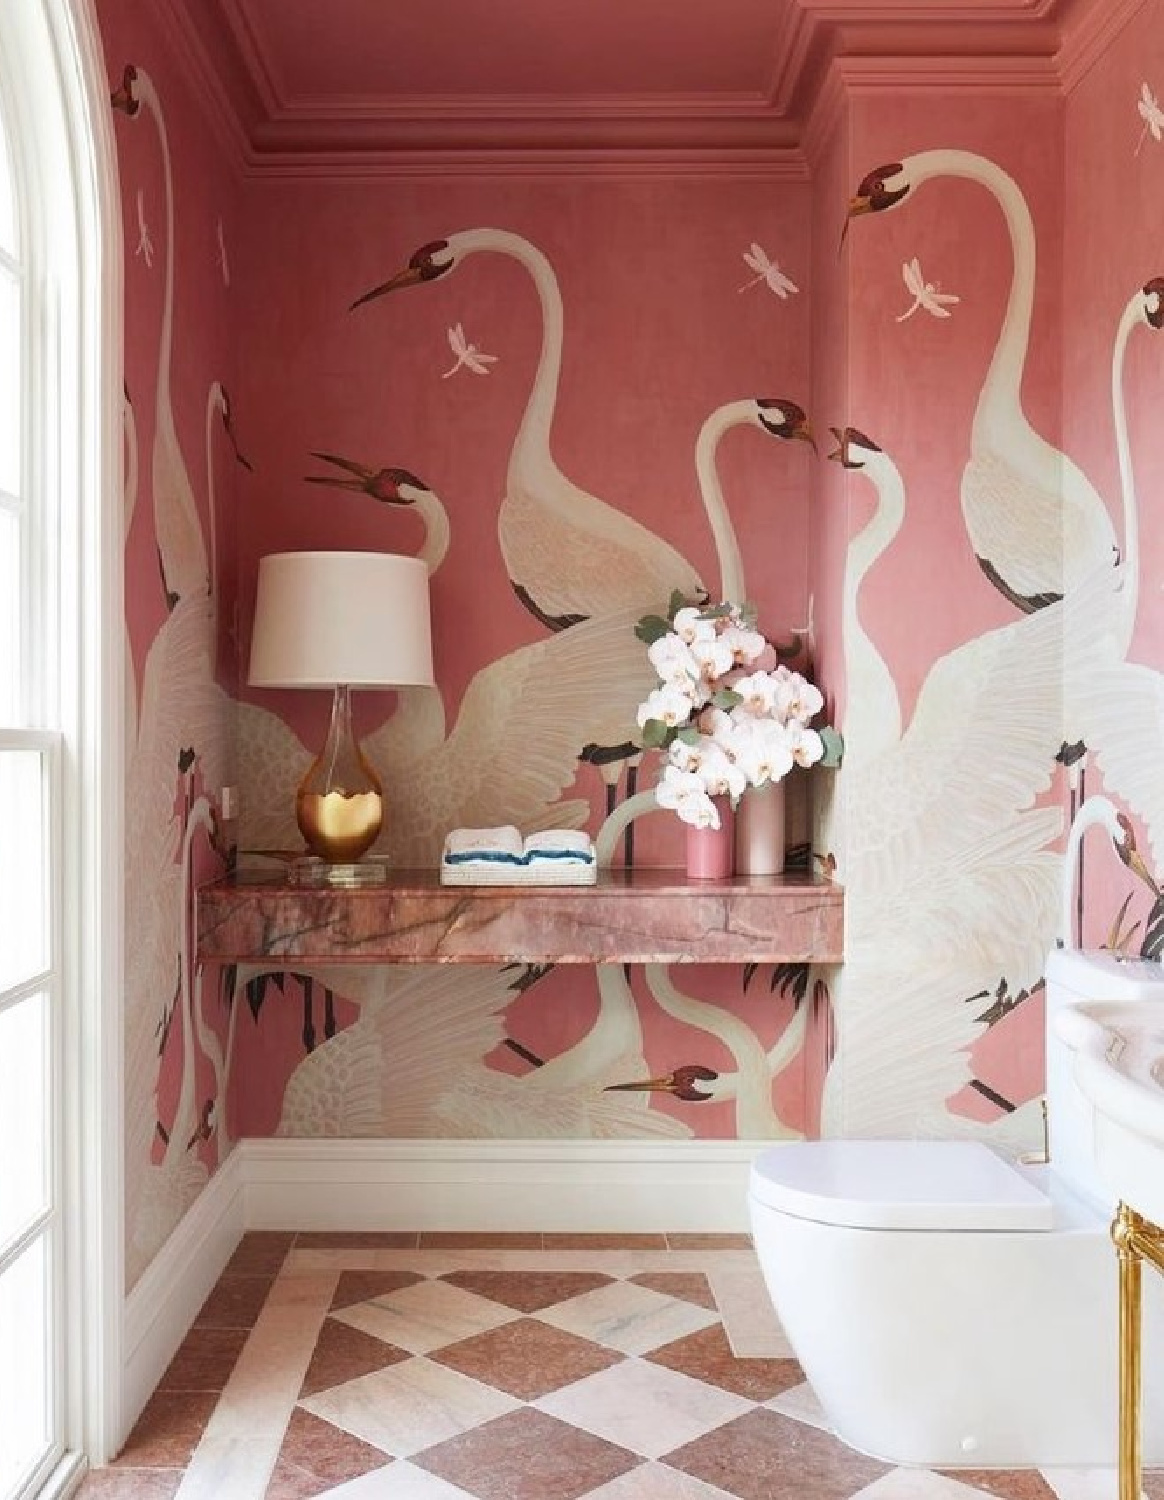 @voguelivingau - bold and whimsical pink bathroom by @katewalker_design with Gucci wallpaper and checkered floor. #pinkbathroom #gucciwallpaper #pinkinteriors